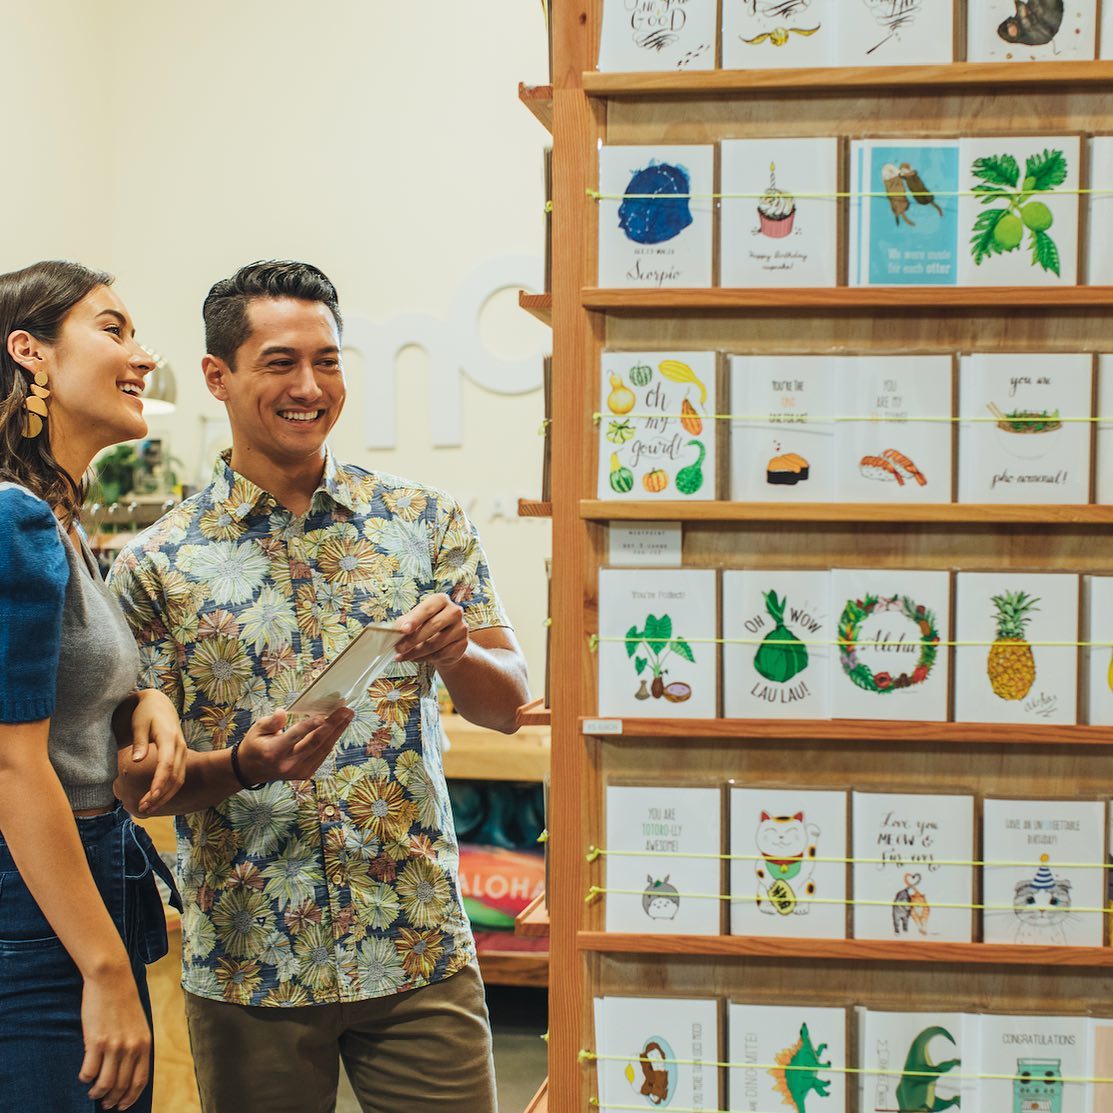 One trip to @mori_hawaii and you’re guaranteed to be inspired! Mori by Art+Flea has been a creative hub for more than 200 artists and designers from across the islands since 2010. Head to South Shore Market to check out this one-stop-shop for local fashion, art, home decor, music and more.